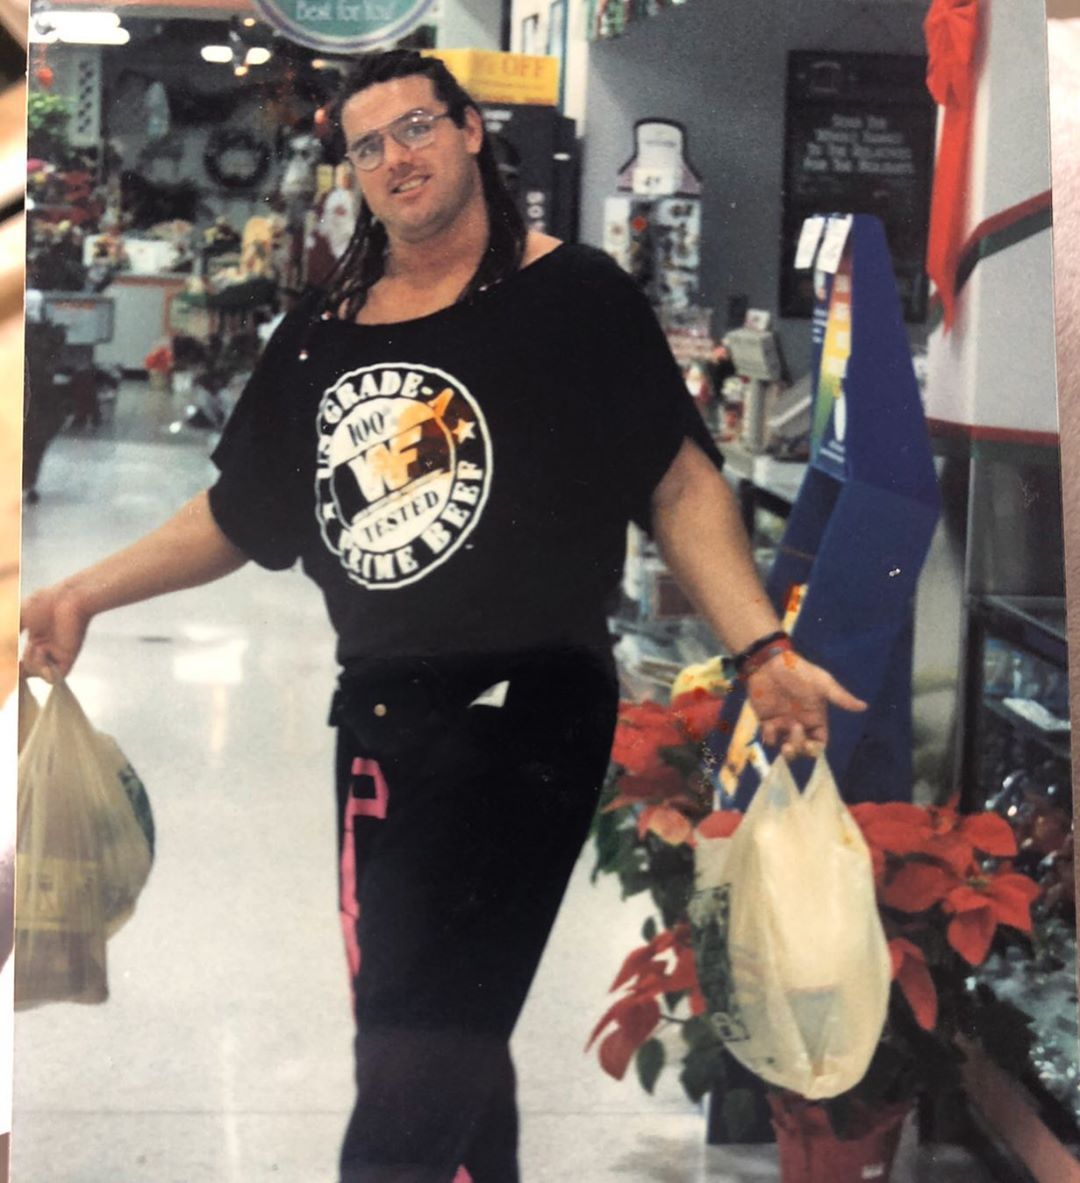 "Get the shopping in Dave." Bum bag, WWF promotional shirt, jogging bottoms. This is how you want to do your Christmas shopping. My favourite outfit out of the lot. The braids make it.